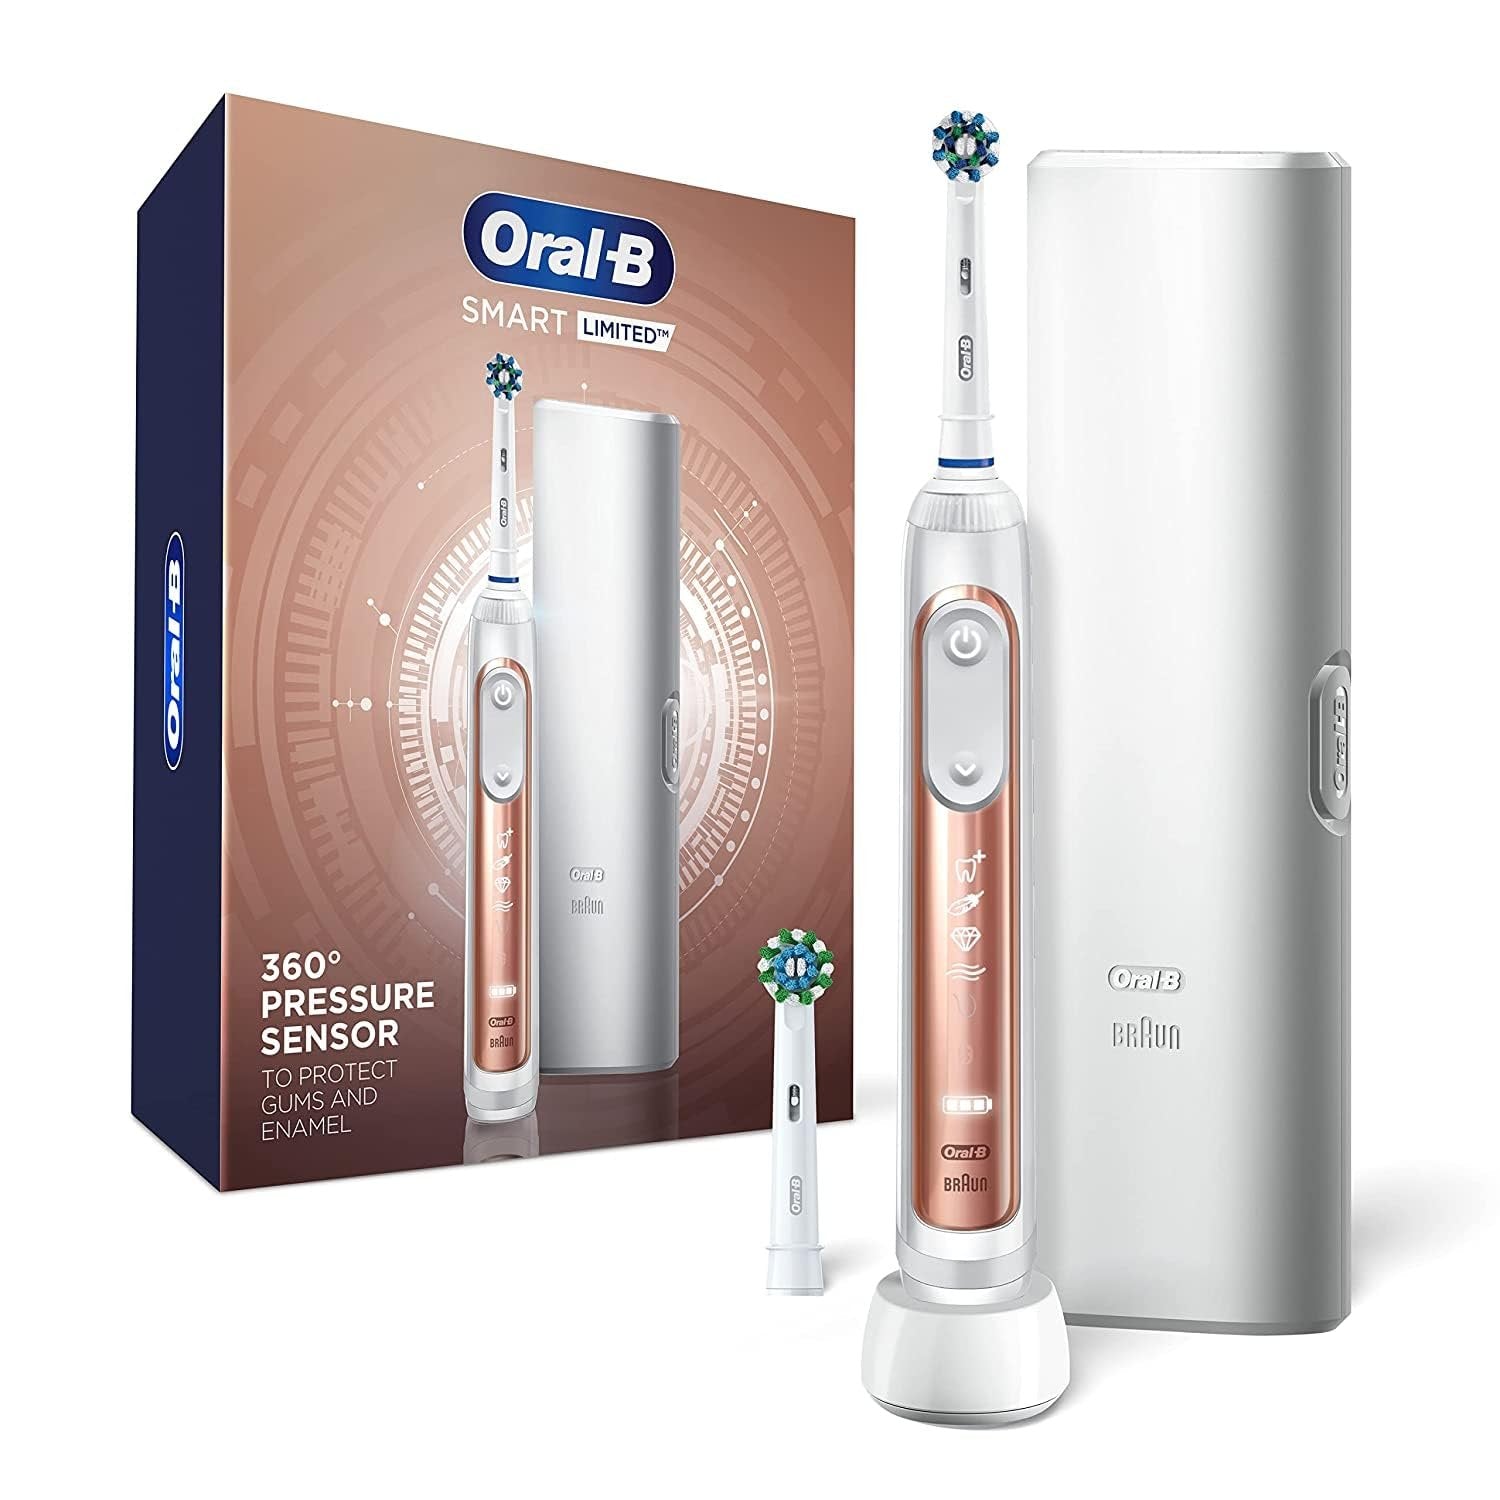 Oral-B Smart Limited Rechargeable Electric Powered Toothbrush, Rose Gold with 2 Brush Heads and Travel Case - Visible Pressure Sensor to Protect Gums - 6 Brushing Modes - 2 Minute Timer